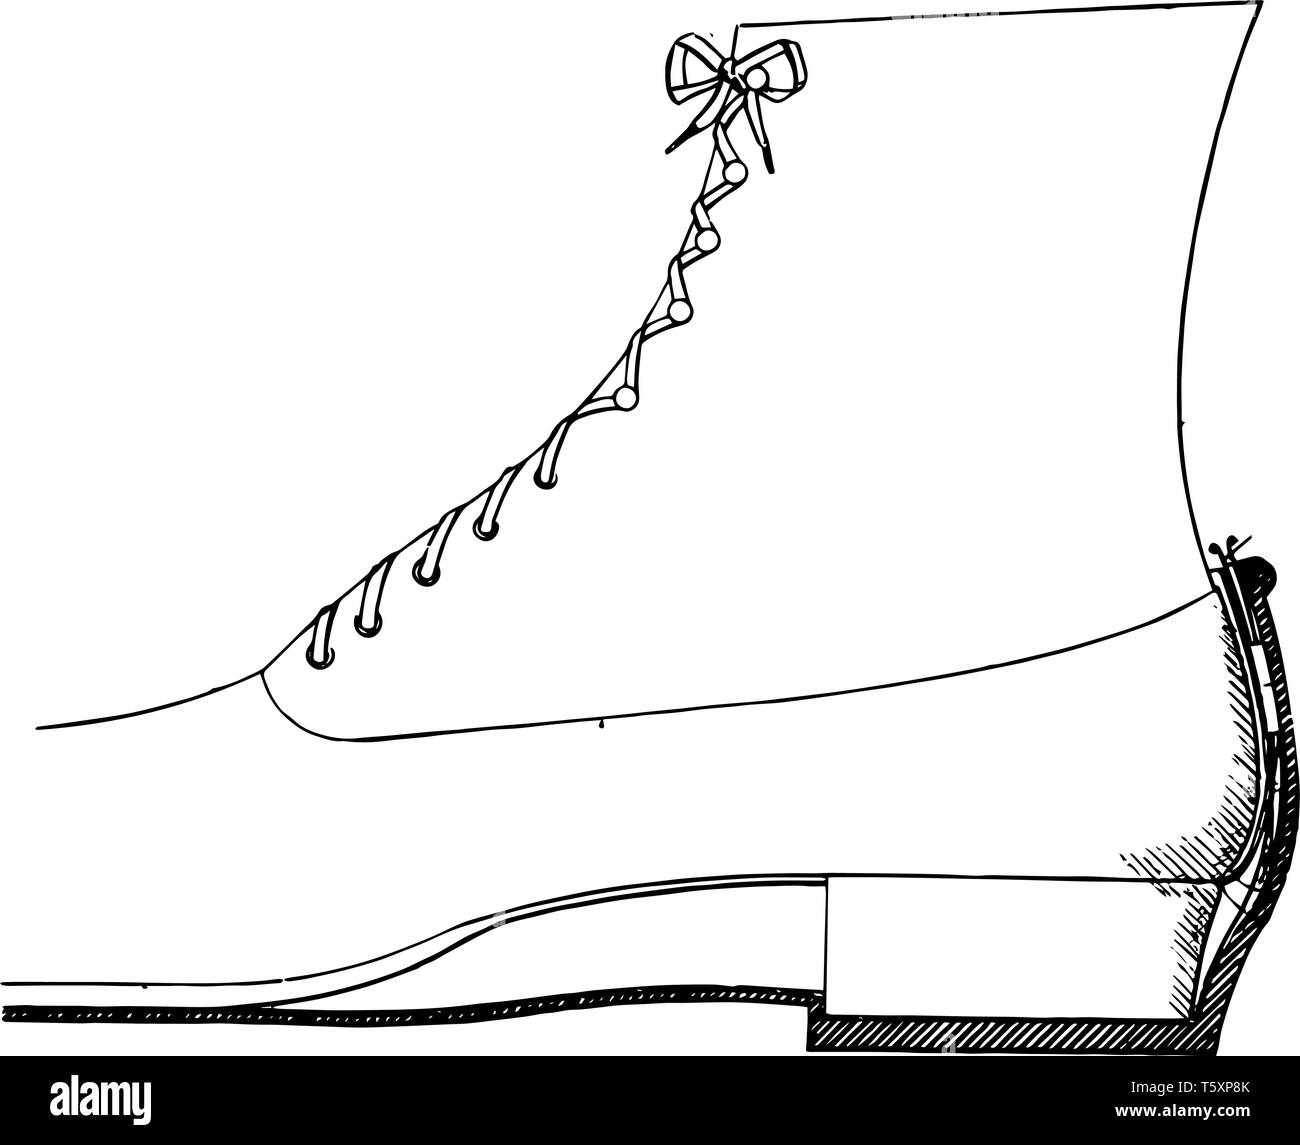 Overshoe Fastening Device are conventional articles of clothing vintage line drawing or engraving illustration. Stock Vector